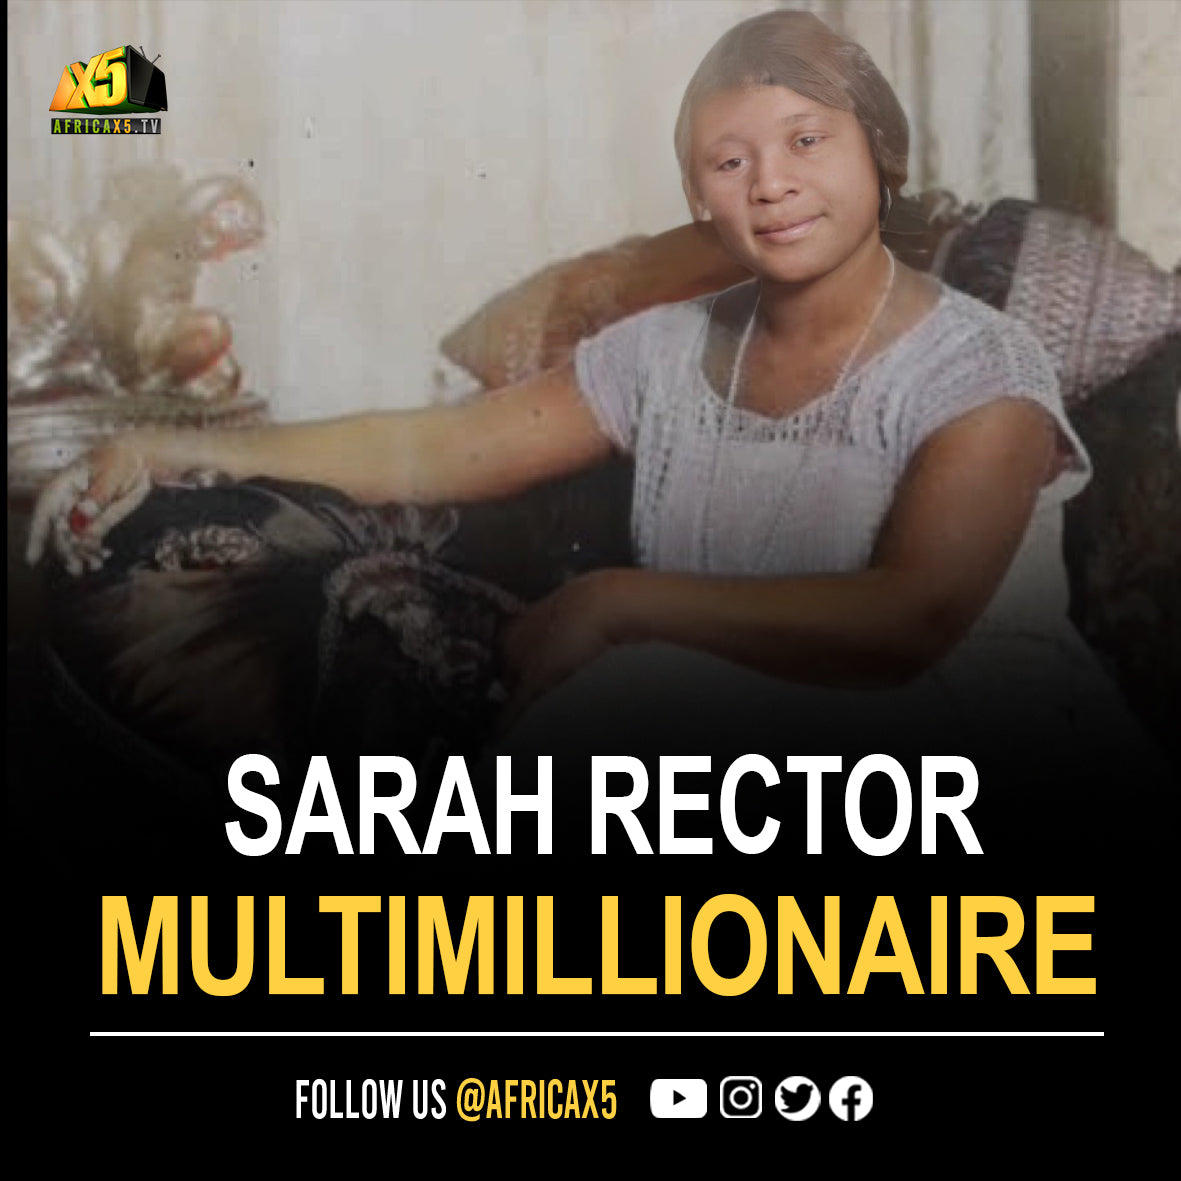 Sarah Rector became a multi-millionare oil baron and the richest black child at just 12 years old.